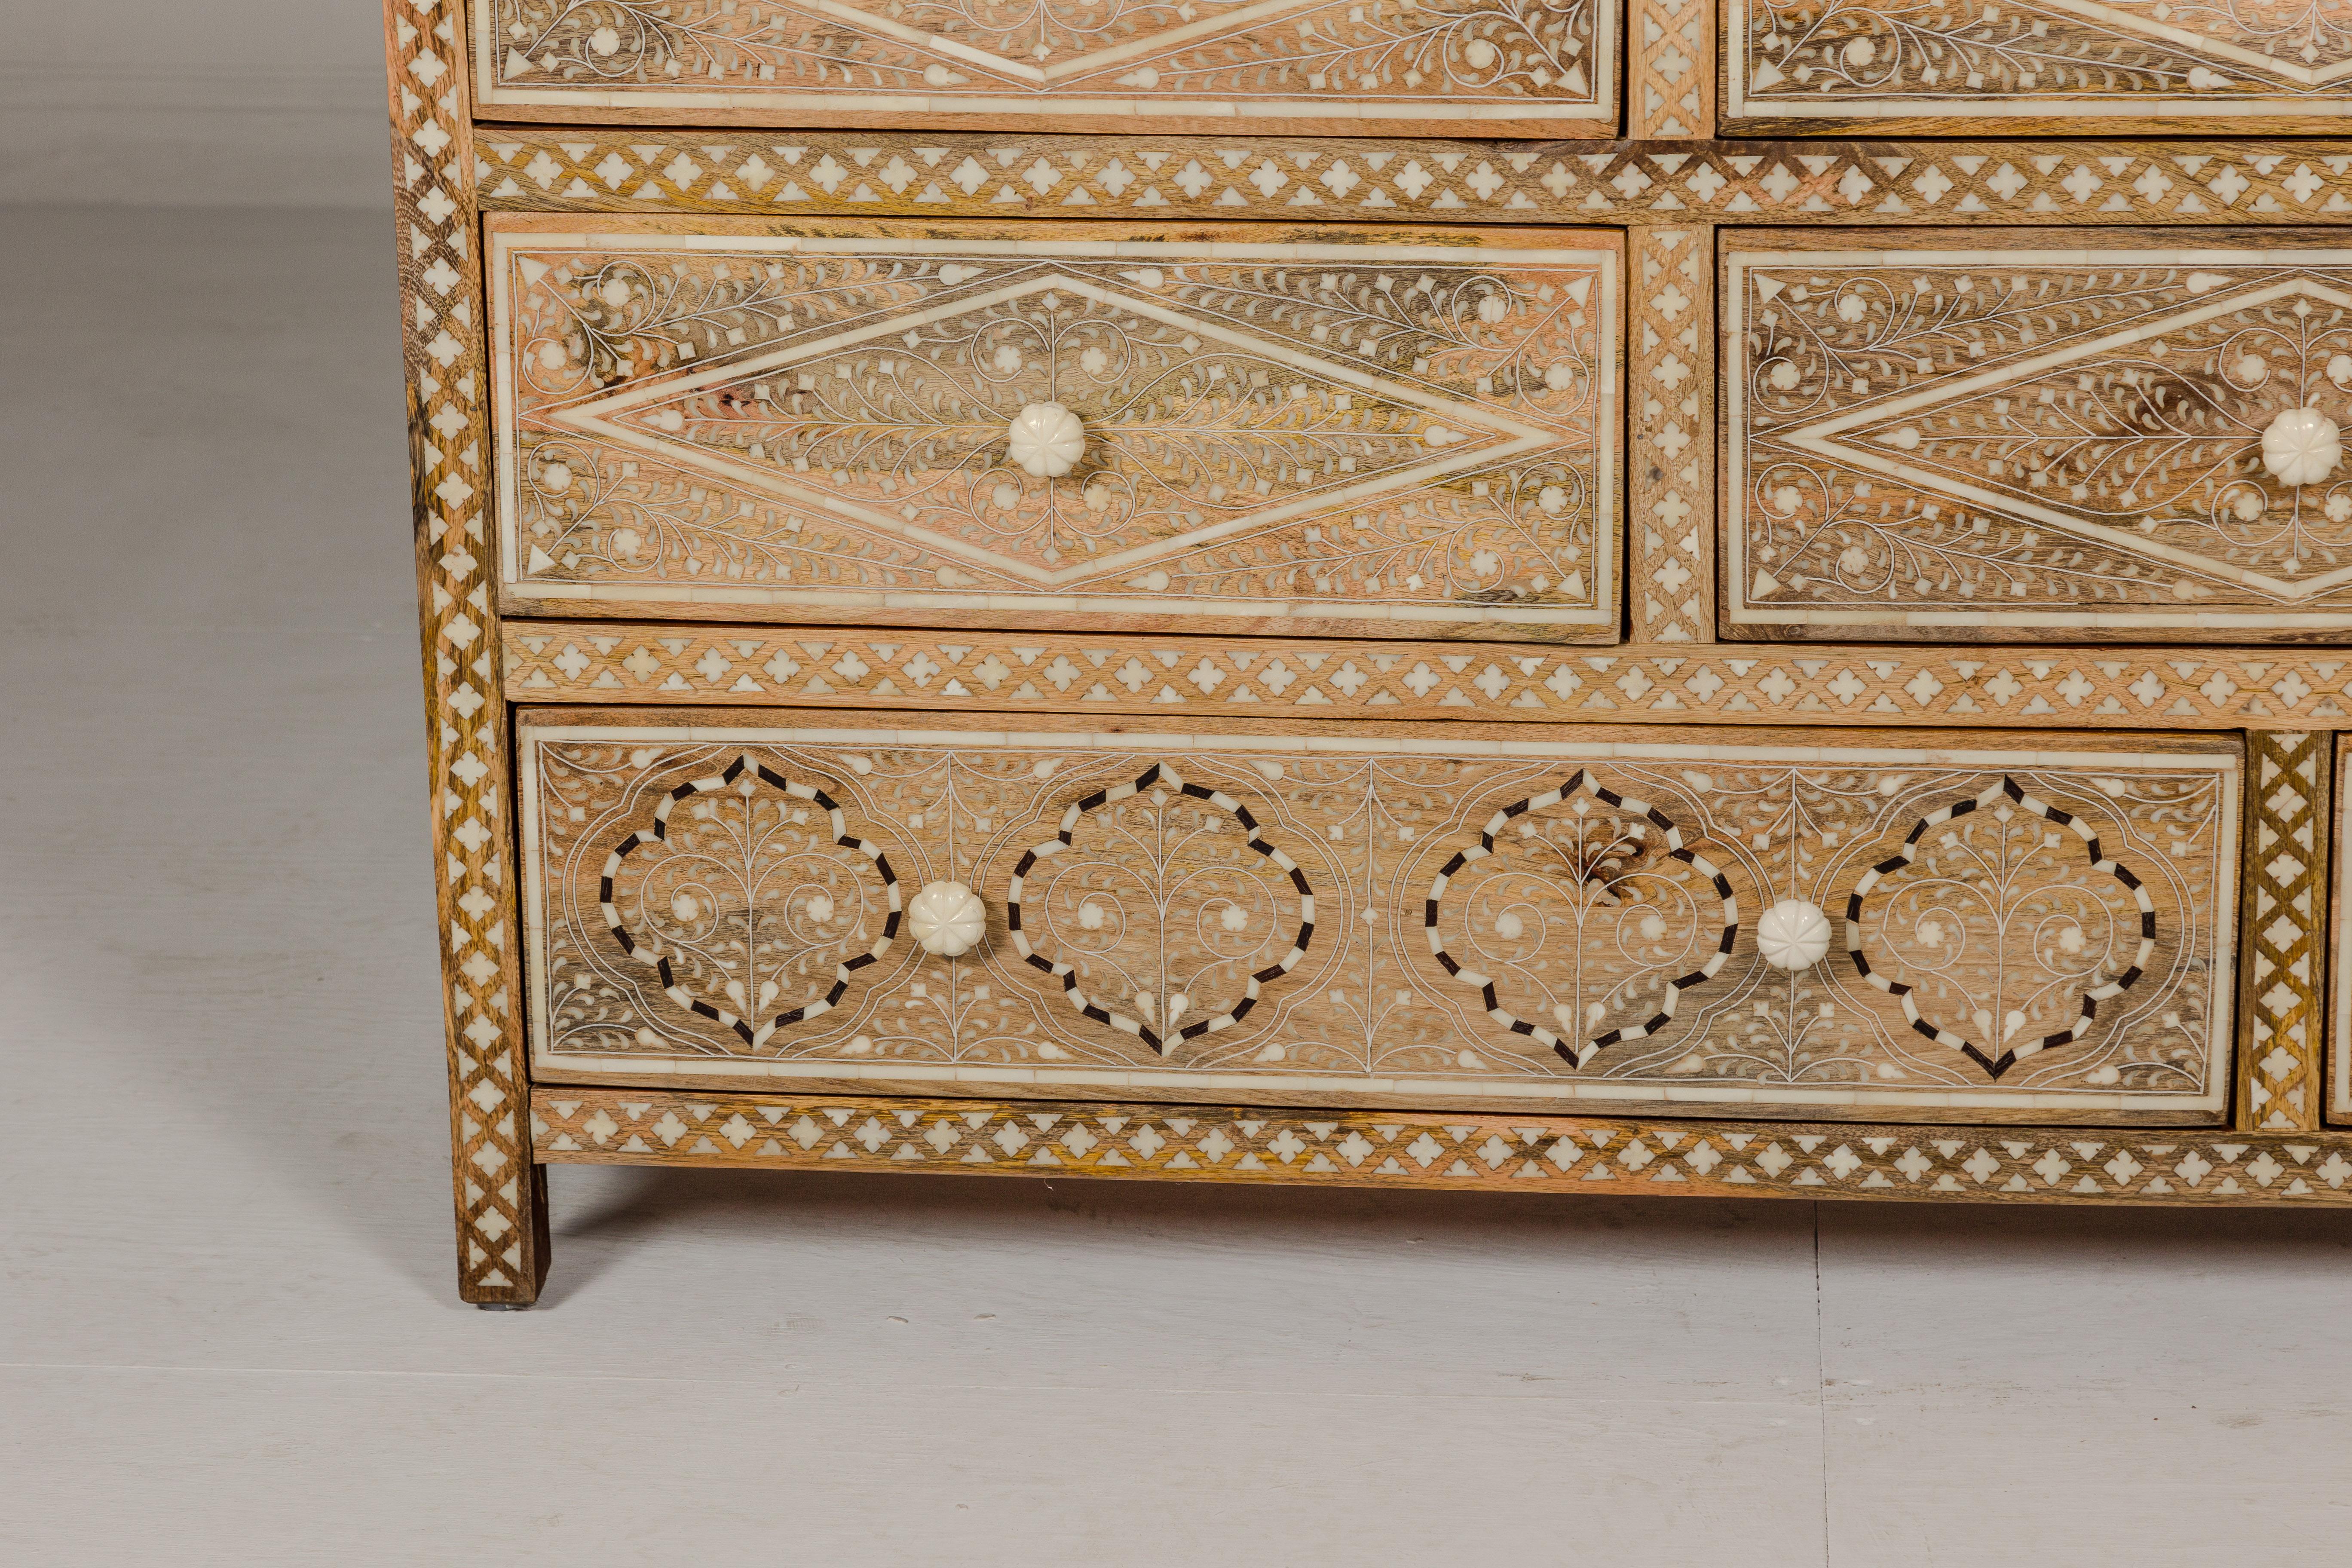 Contemporary Anglo-Indian Style Mango Wood Dresser with Eight Drawers and Floral Bone Inlay